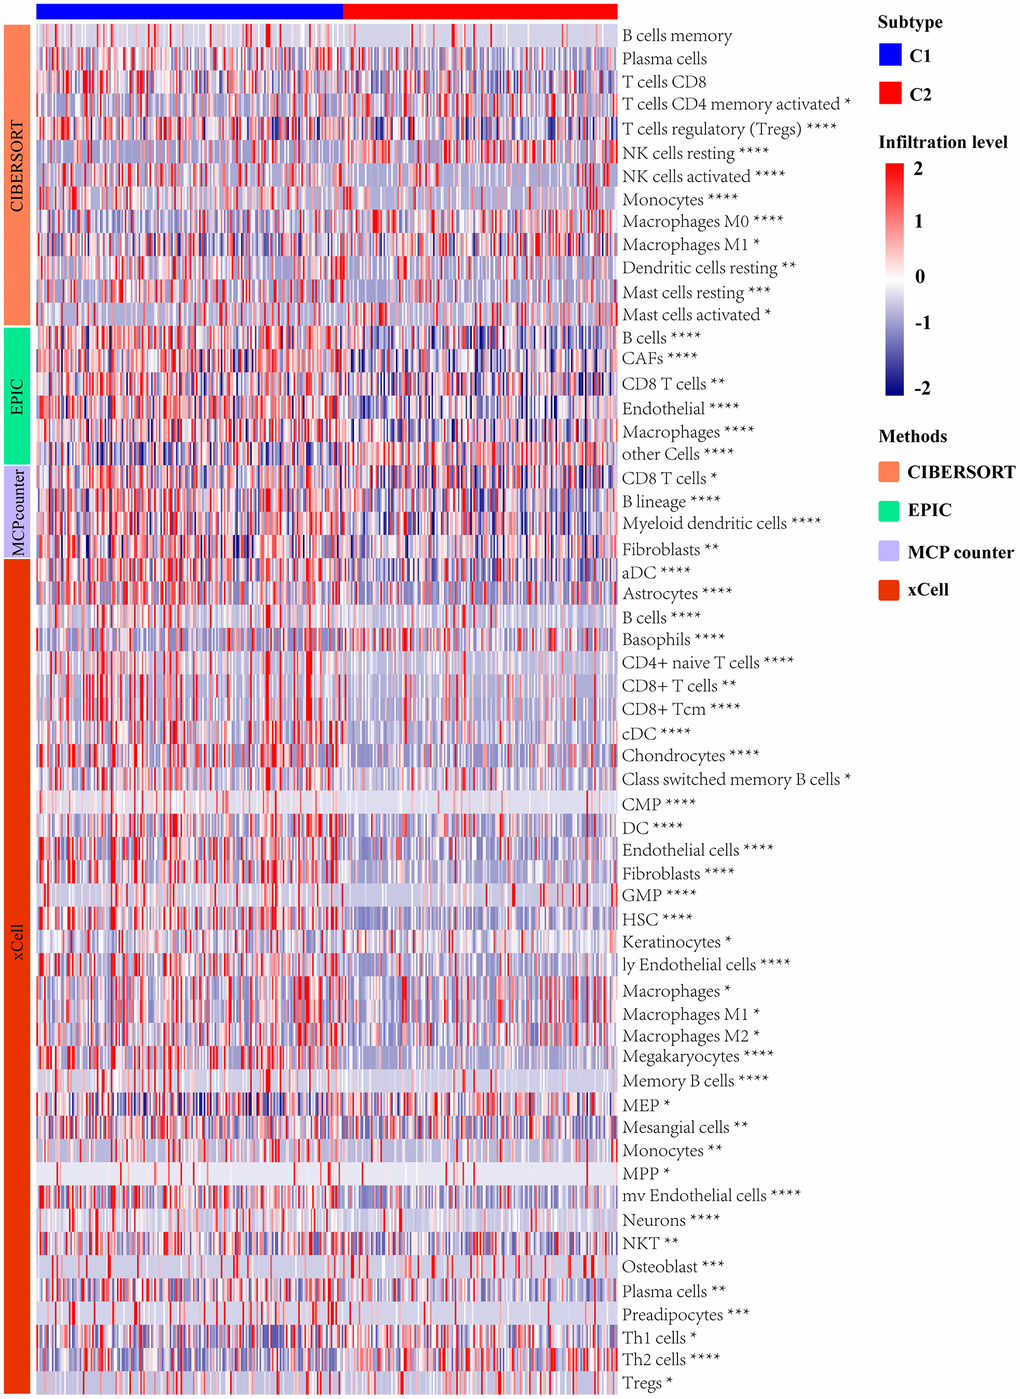 Analysis of immune landscape between two subtypes distinguished by UPR-related gene expression.